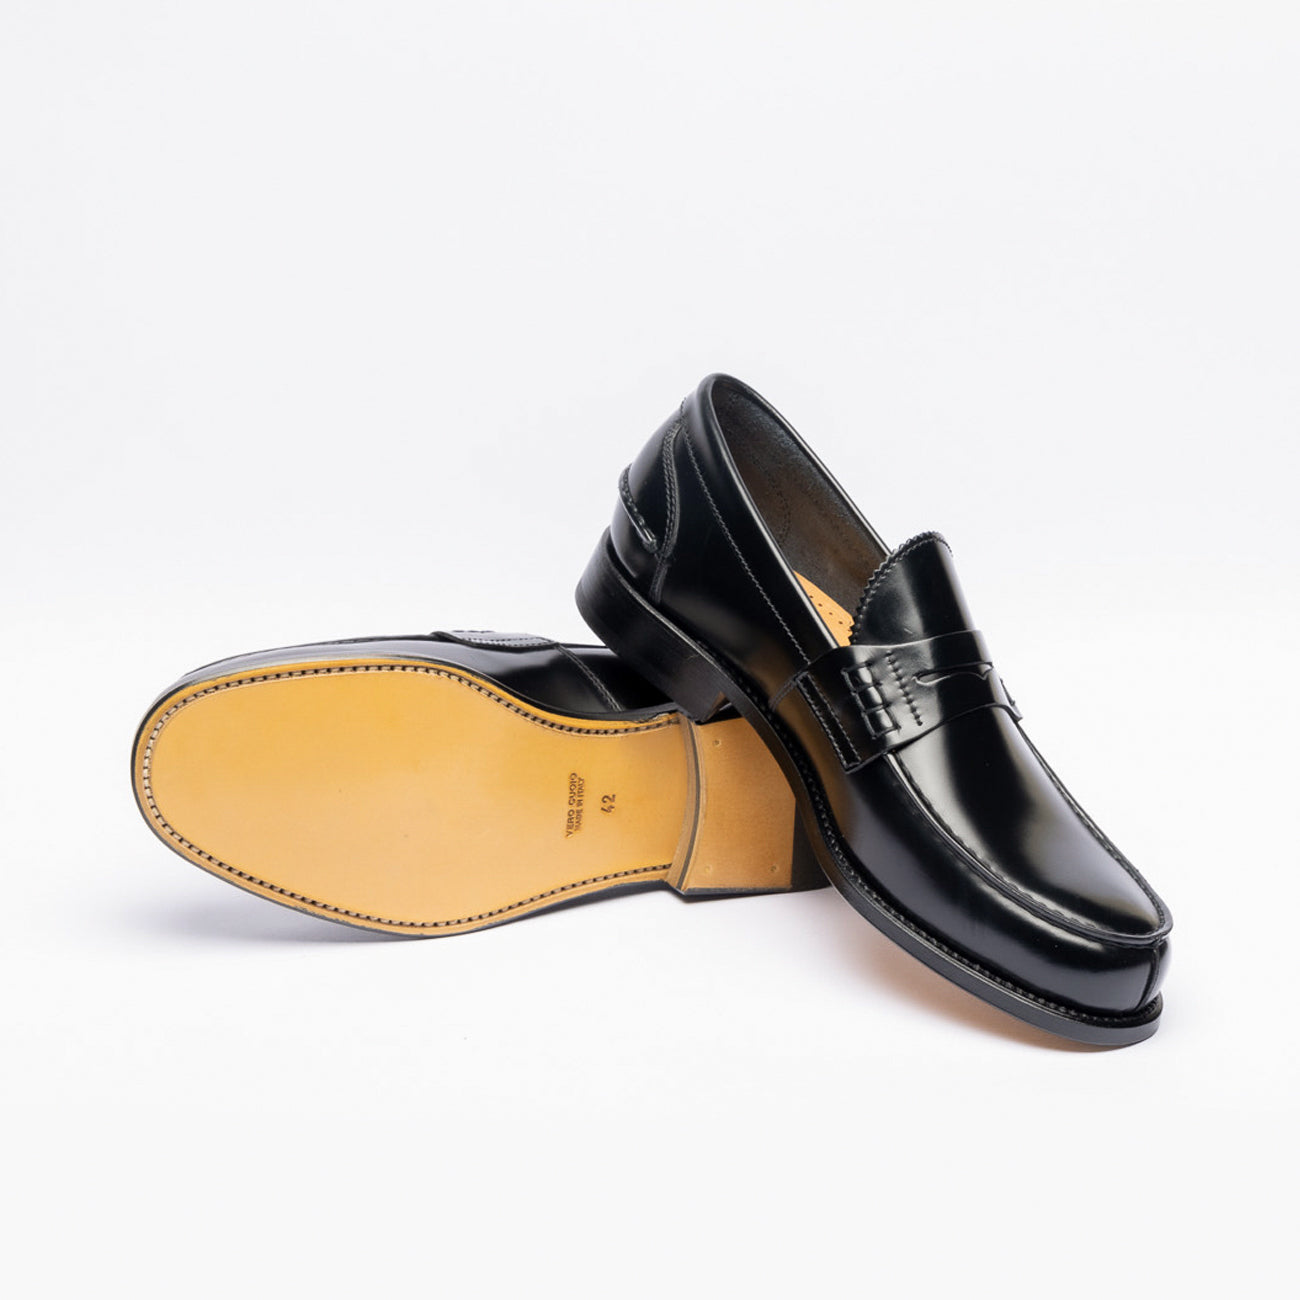 Penny loafer Borghini 750 moccasin in black brushed leather